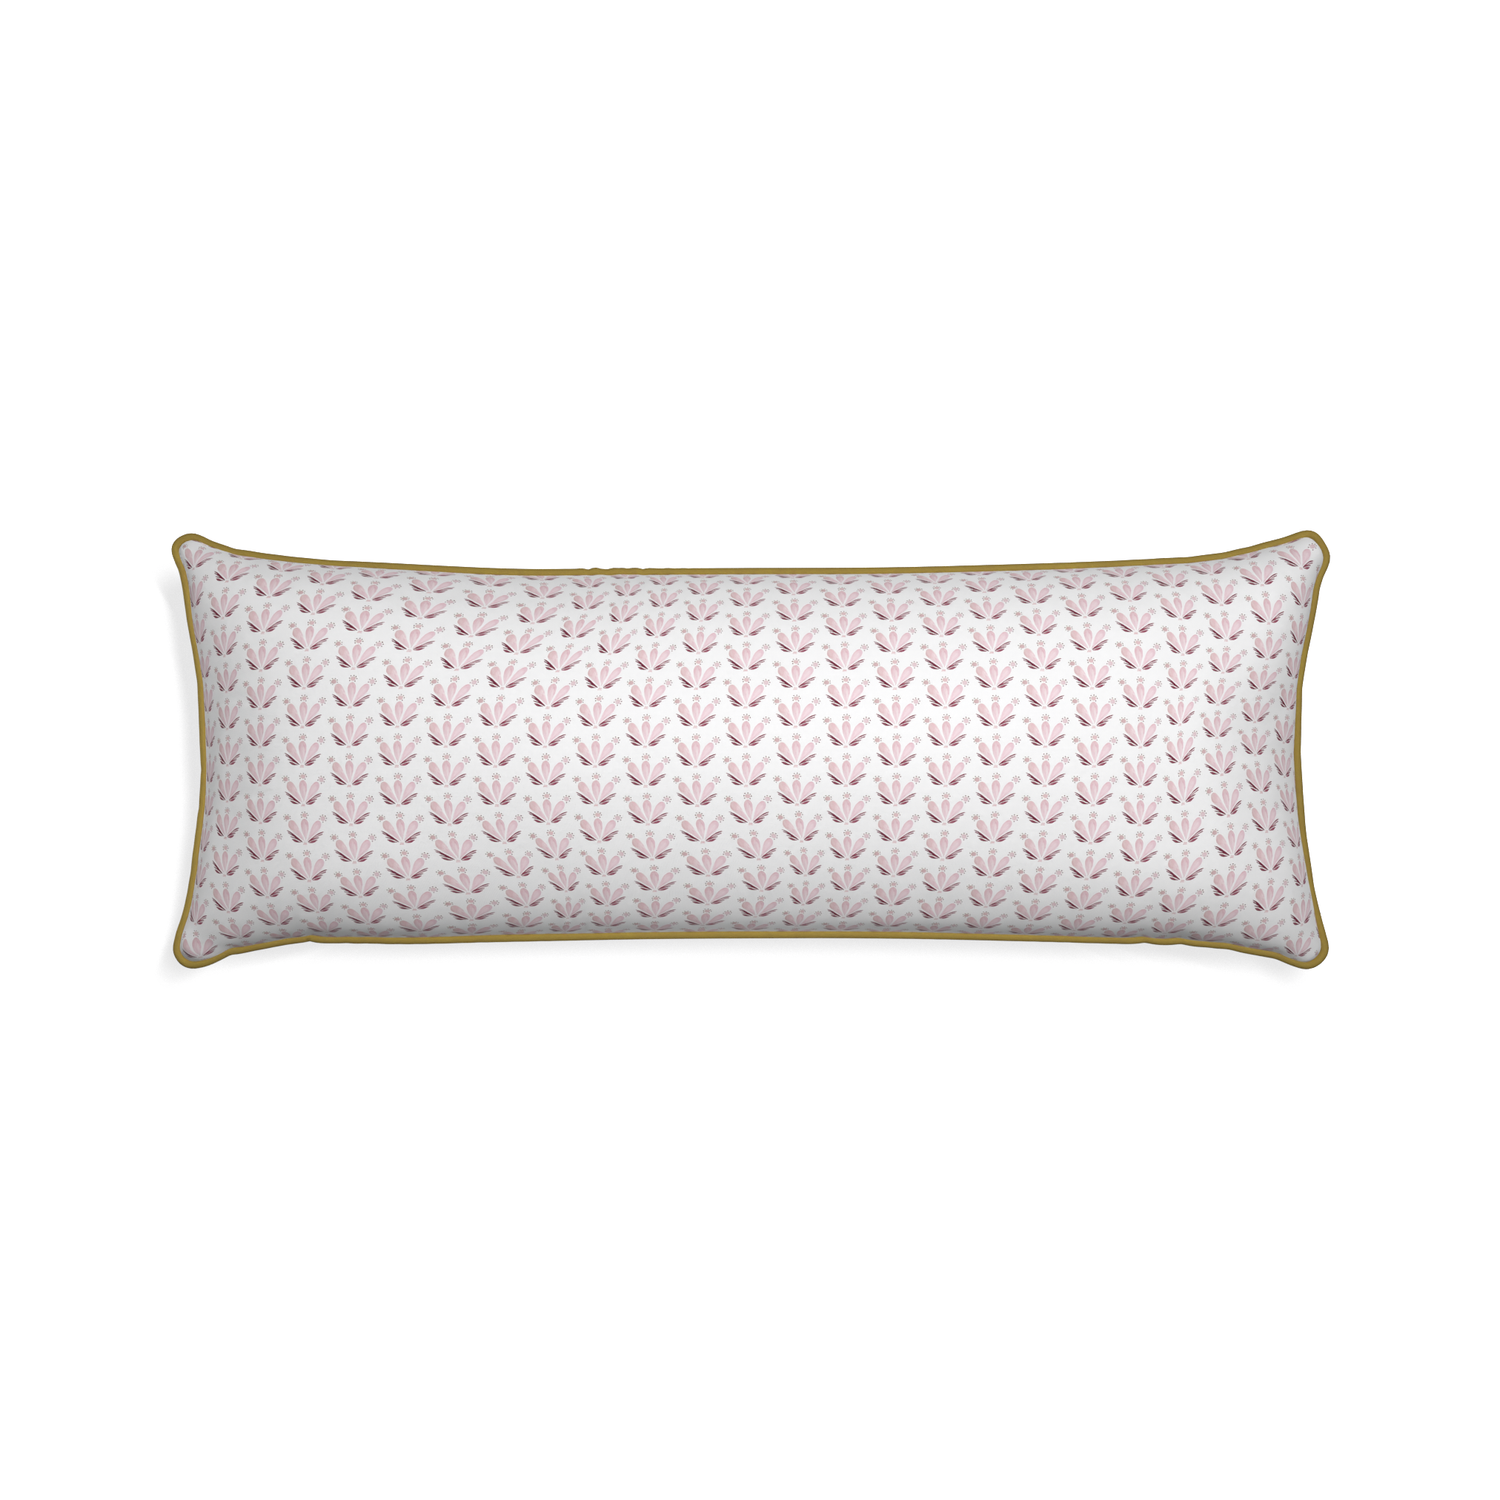 Xl-lumbar serena pink custom pink & burgundy drop repeat floralpillow with c piping on white background